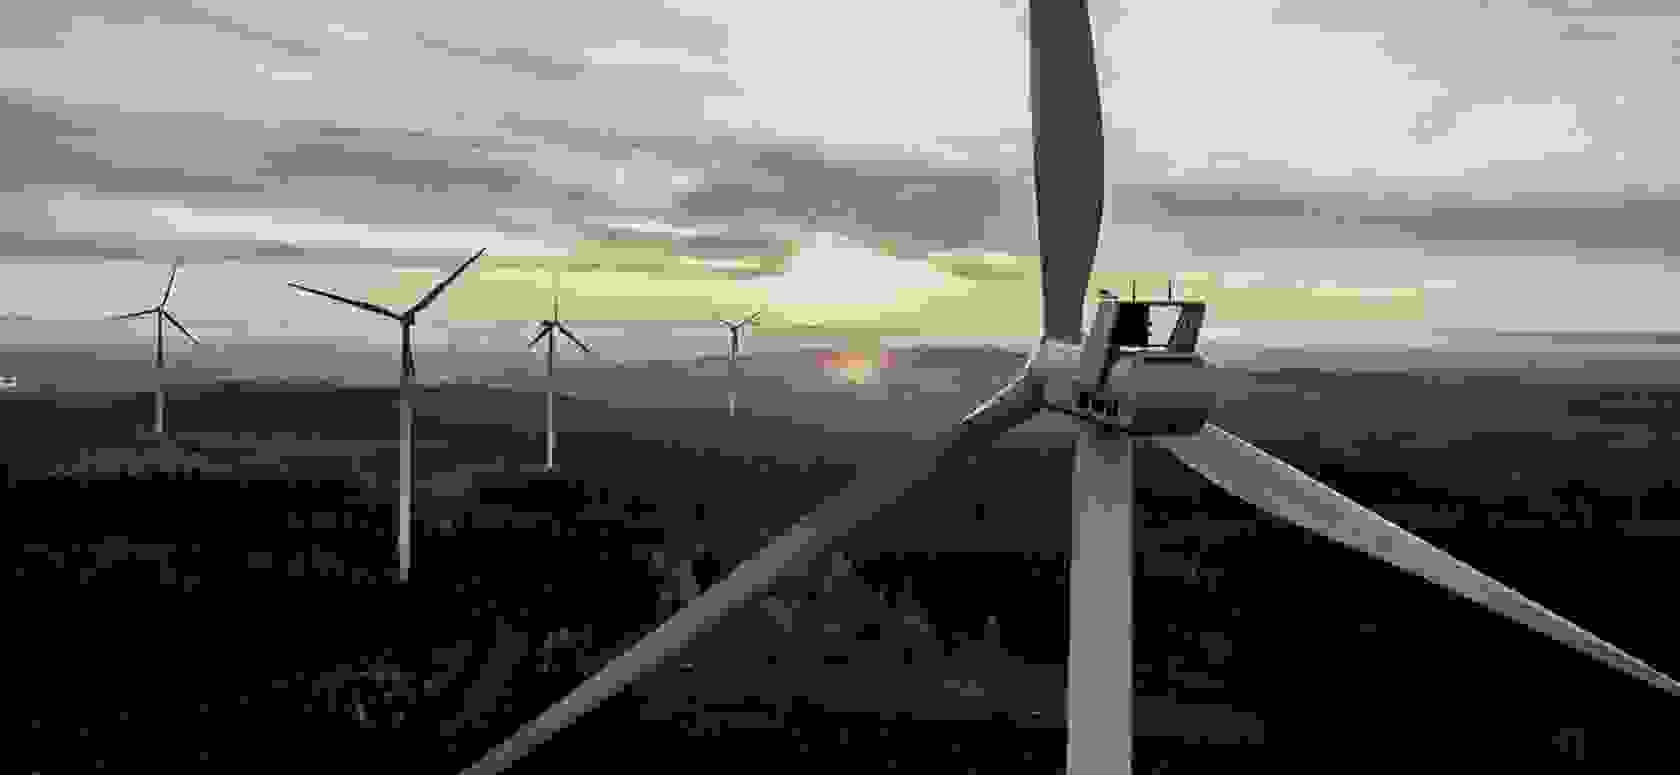  Wind turbines that produce green energy